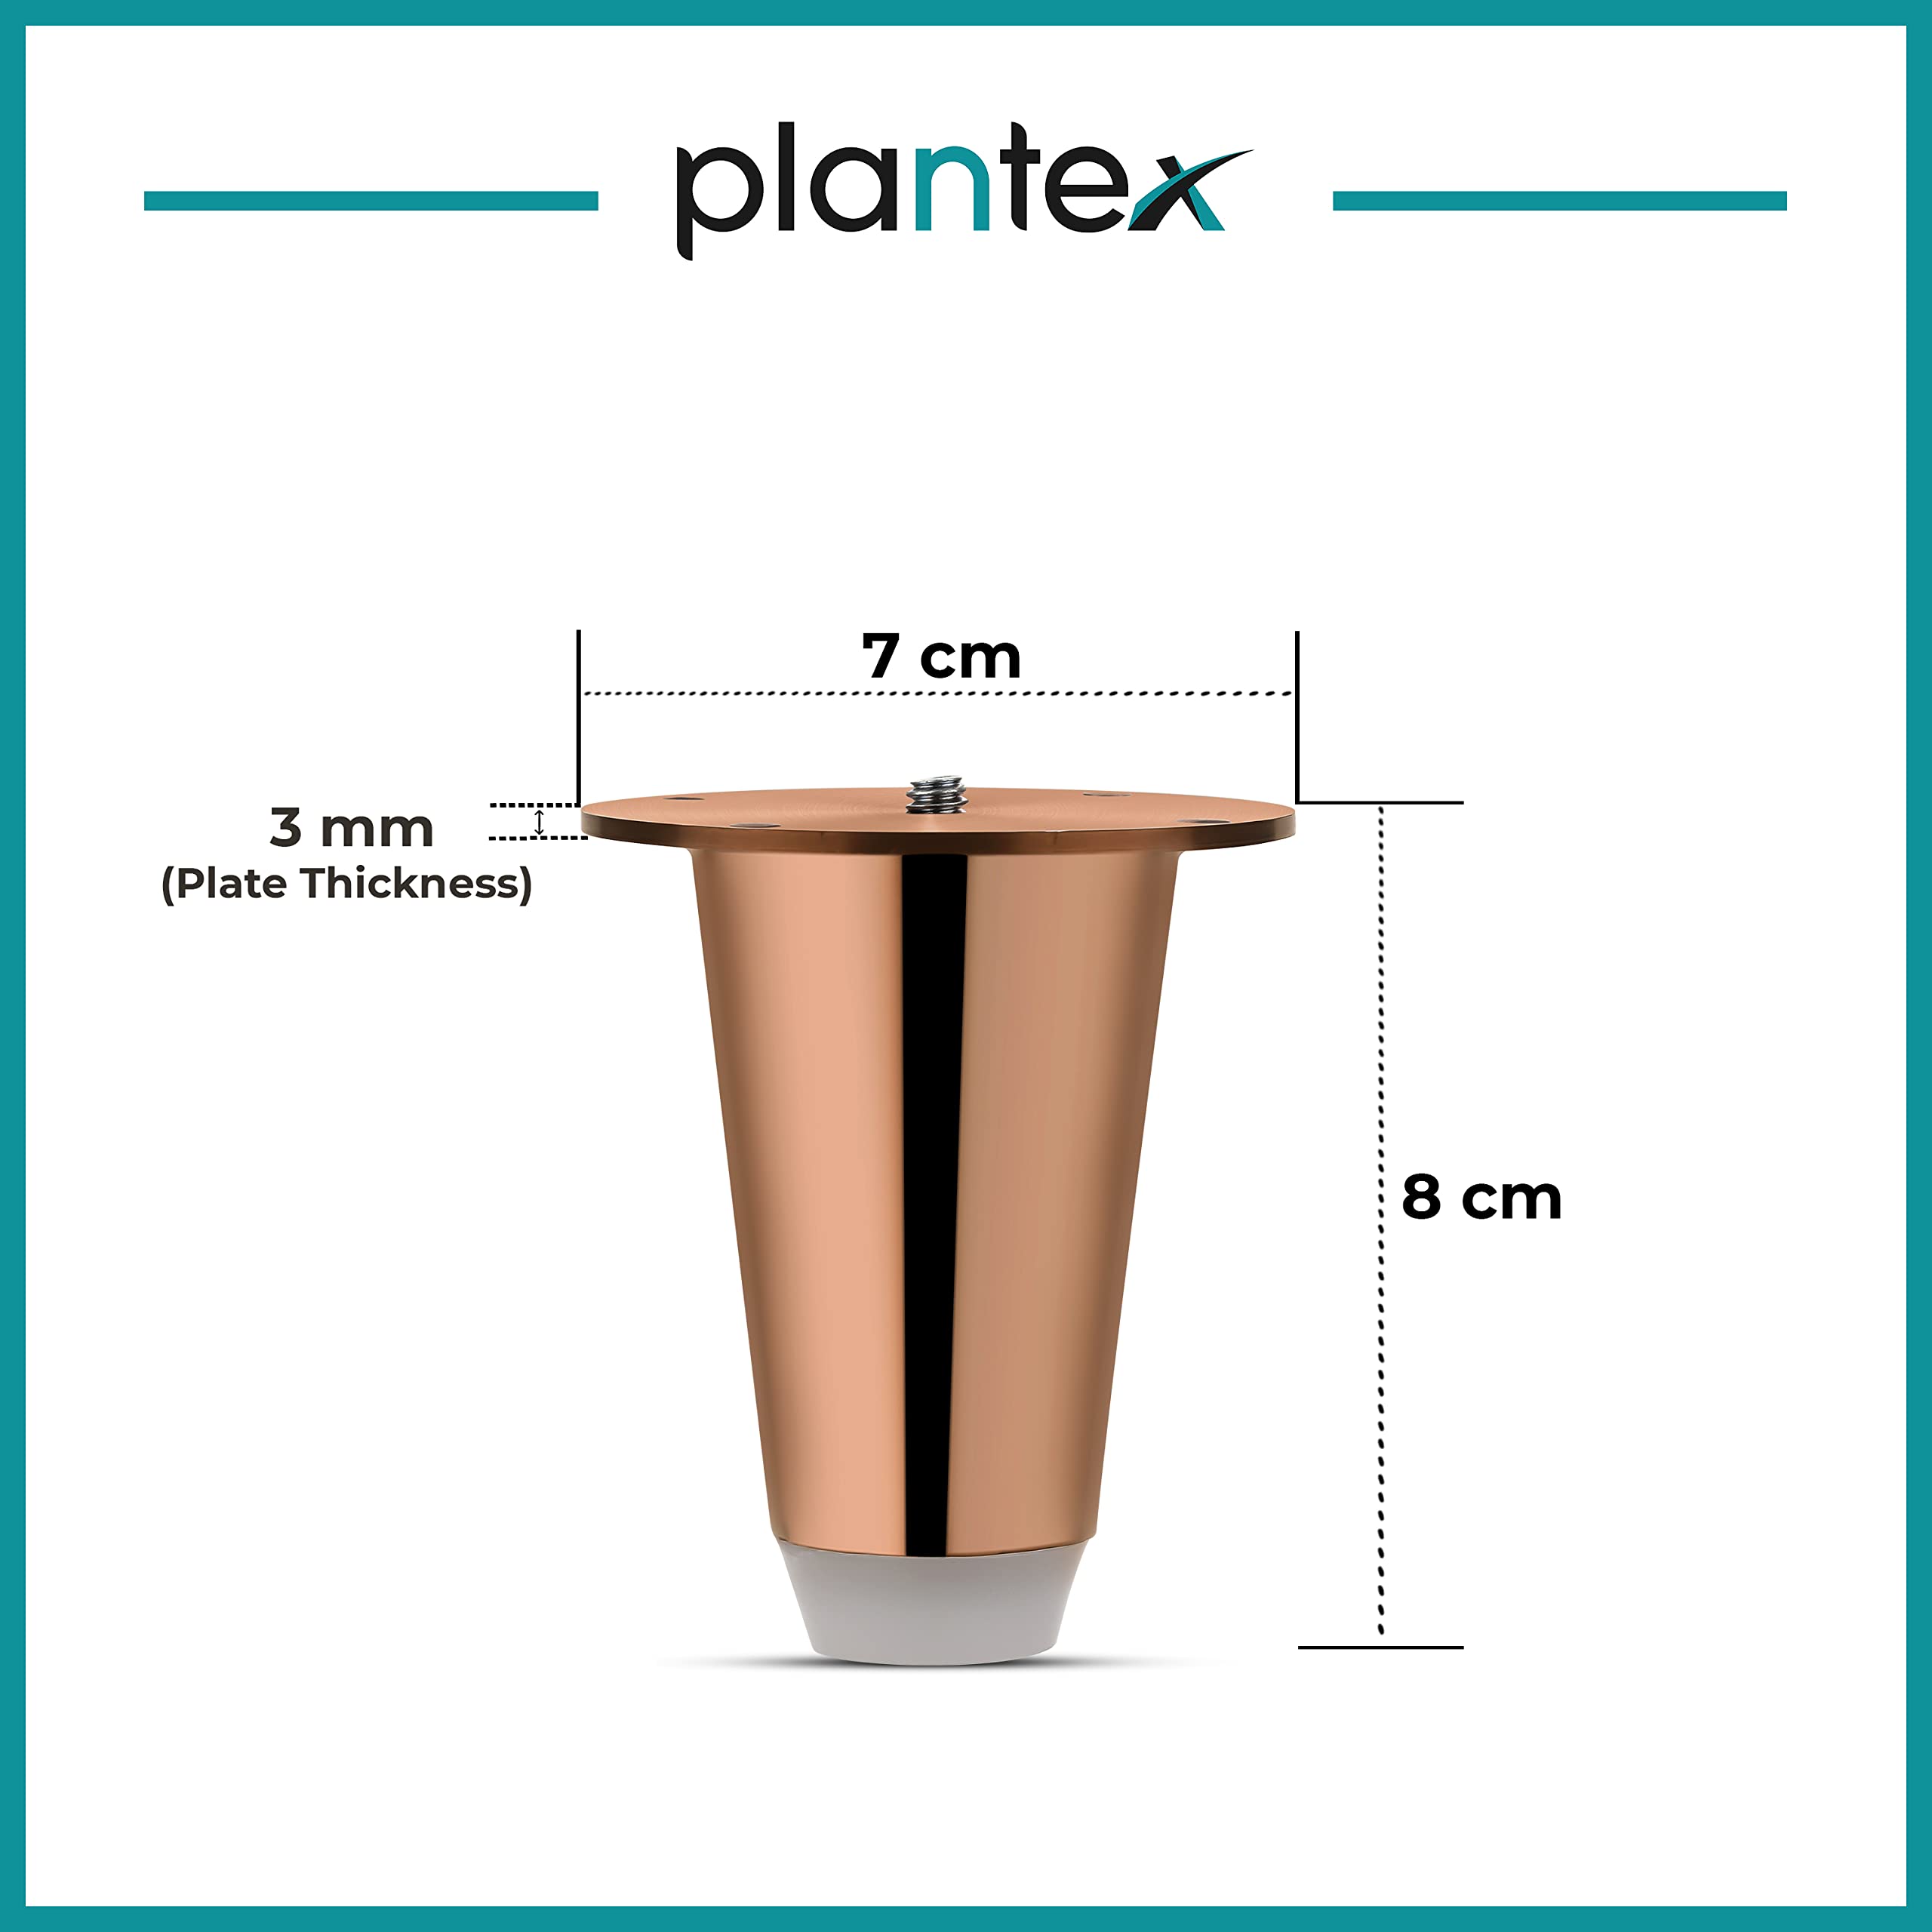 Plantex Heavy Duty Stainless Steel 3 inch Sofa Leg/Bed Furniture Leg Pair for Home Furnitures (DTS-53, Rose Gold) – 4 Pcs